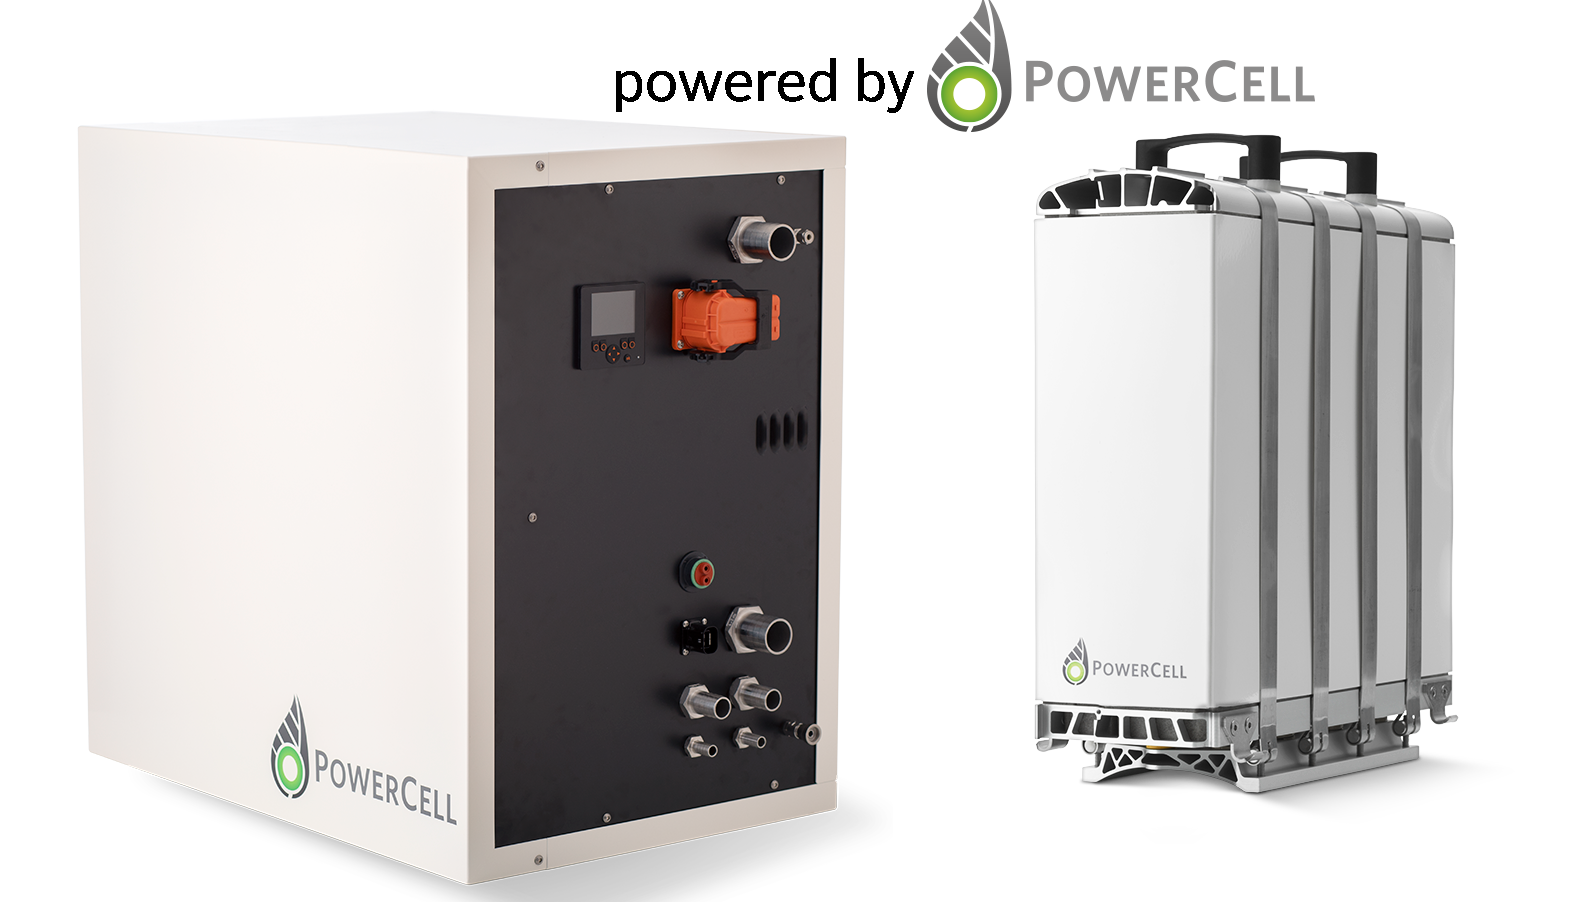 M100 2BS3 PowerCell Units 1